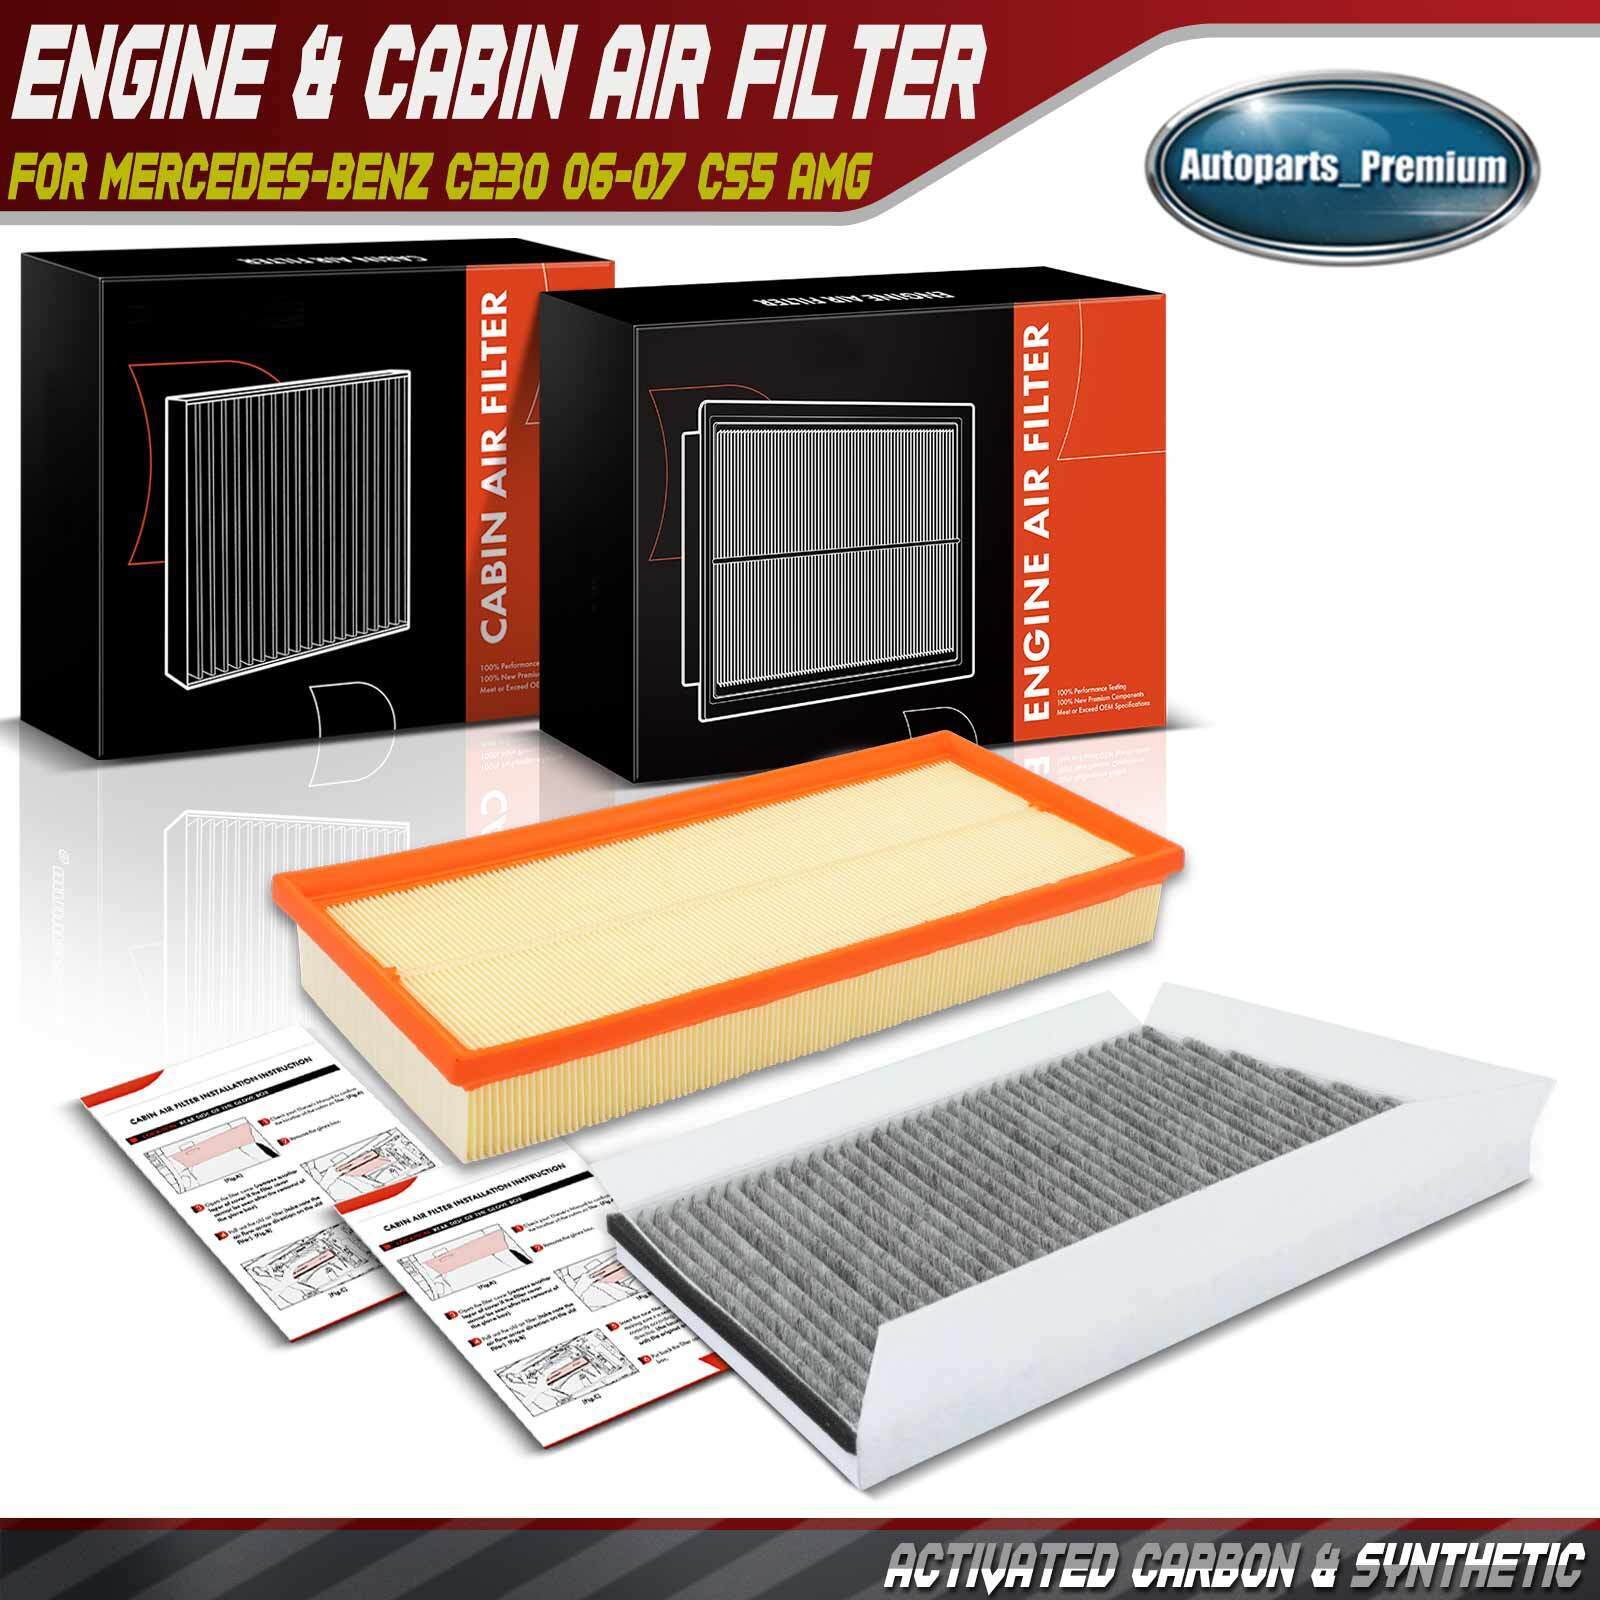 Engine & Activated Carbon Cabin Air Filter for Mercedes-Benz C230 06-07 C55 AMG